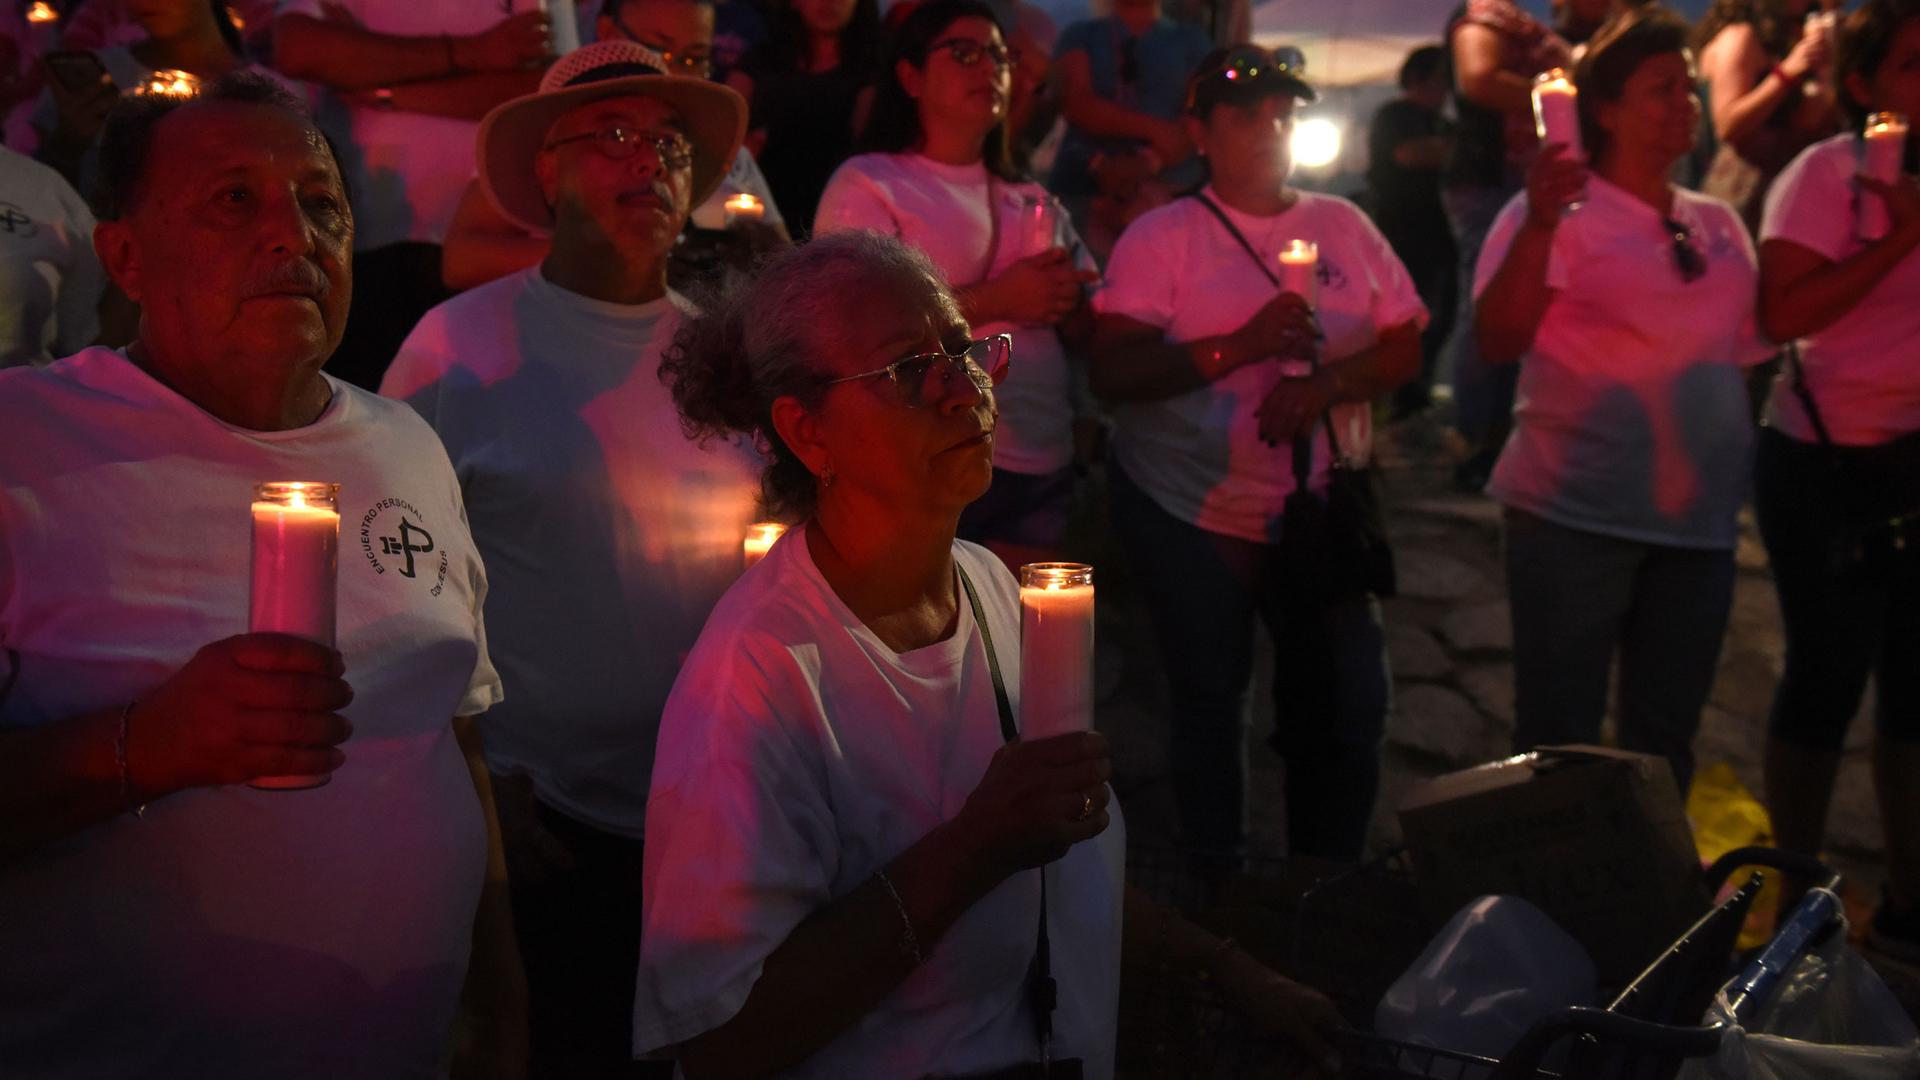 A group of people hold candles during a vigil at a memorial.